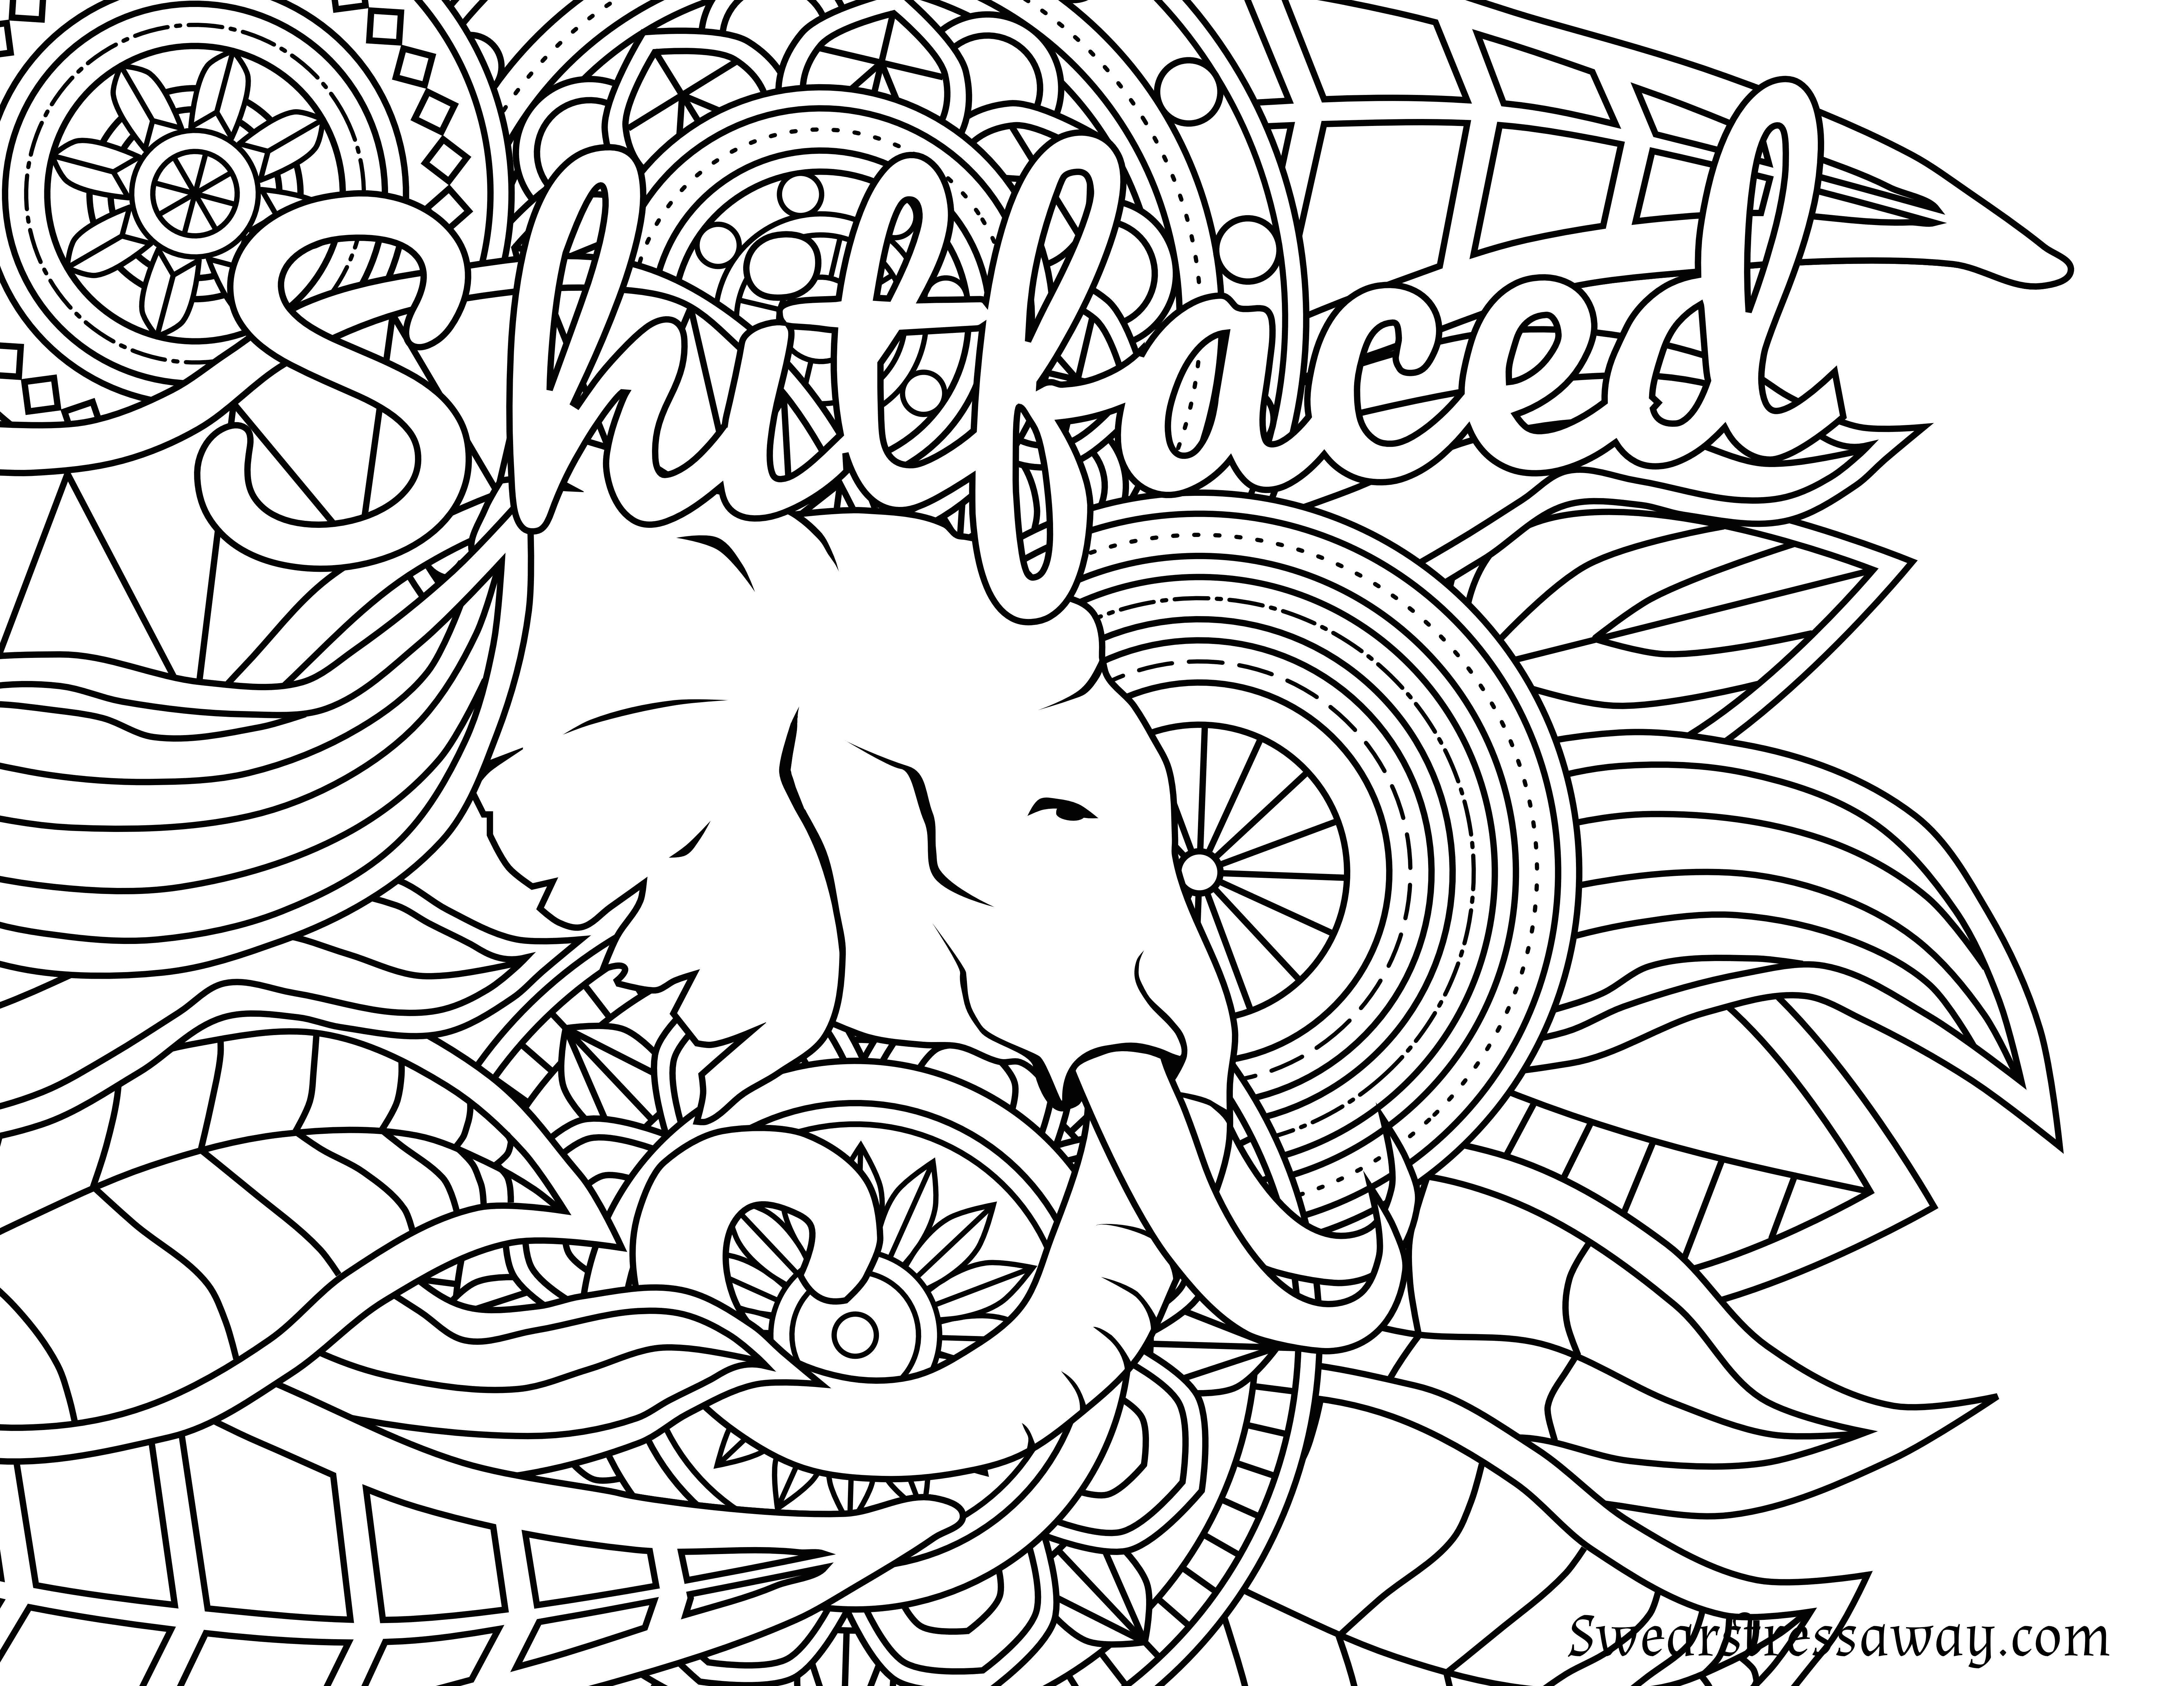 Free Printable Coloring Page - Shitfaced - Swear Word Coloring Page - Free Printable Word Coloring Pages